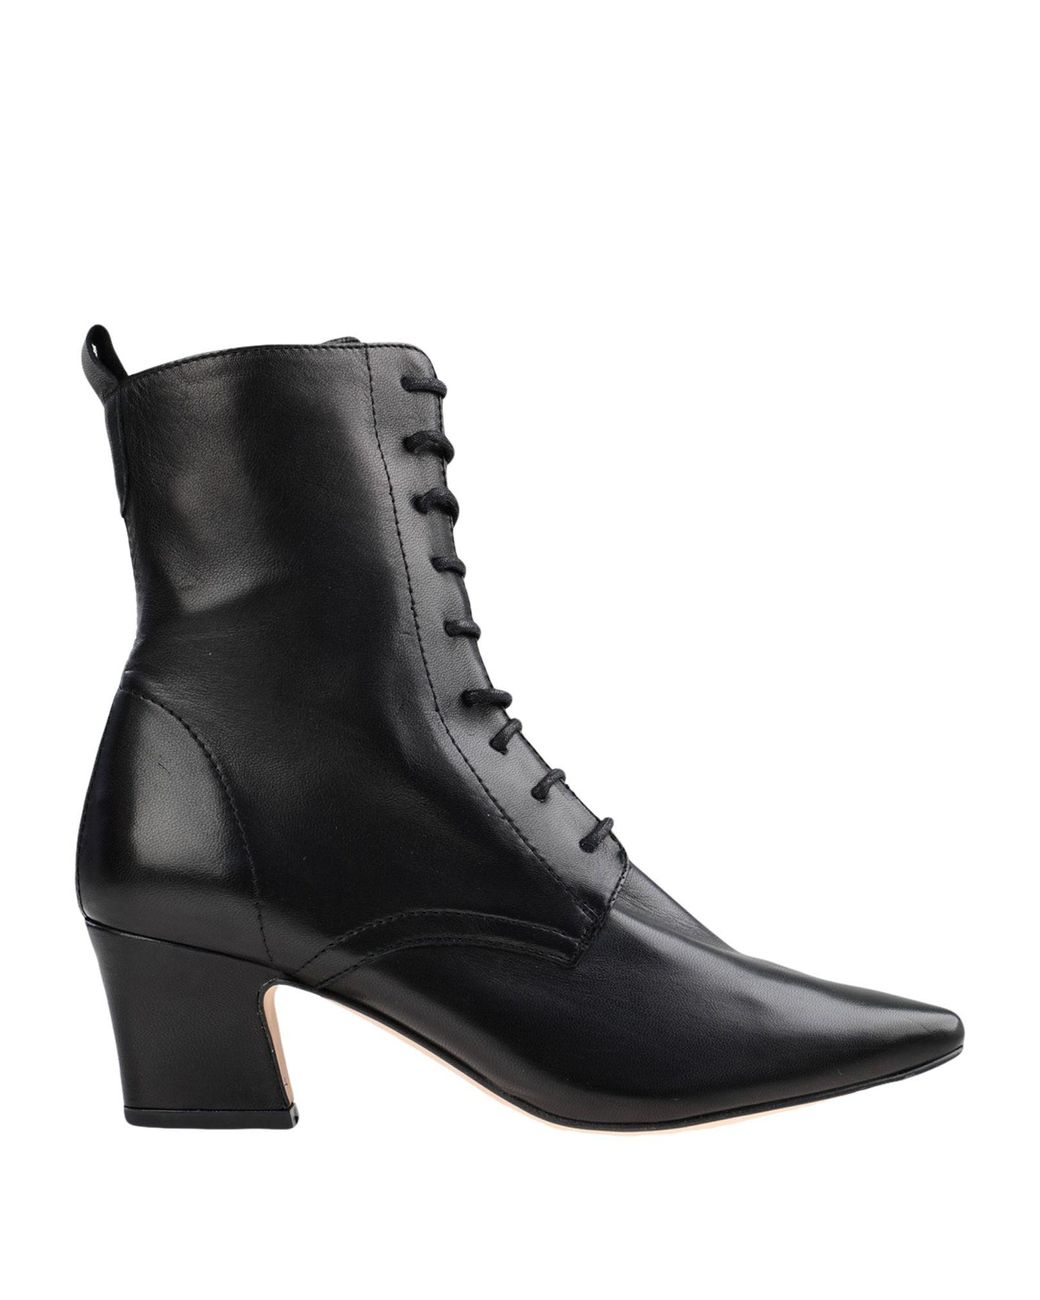 Miista Leather Ankle Boots in Black - Lyst